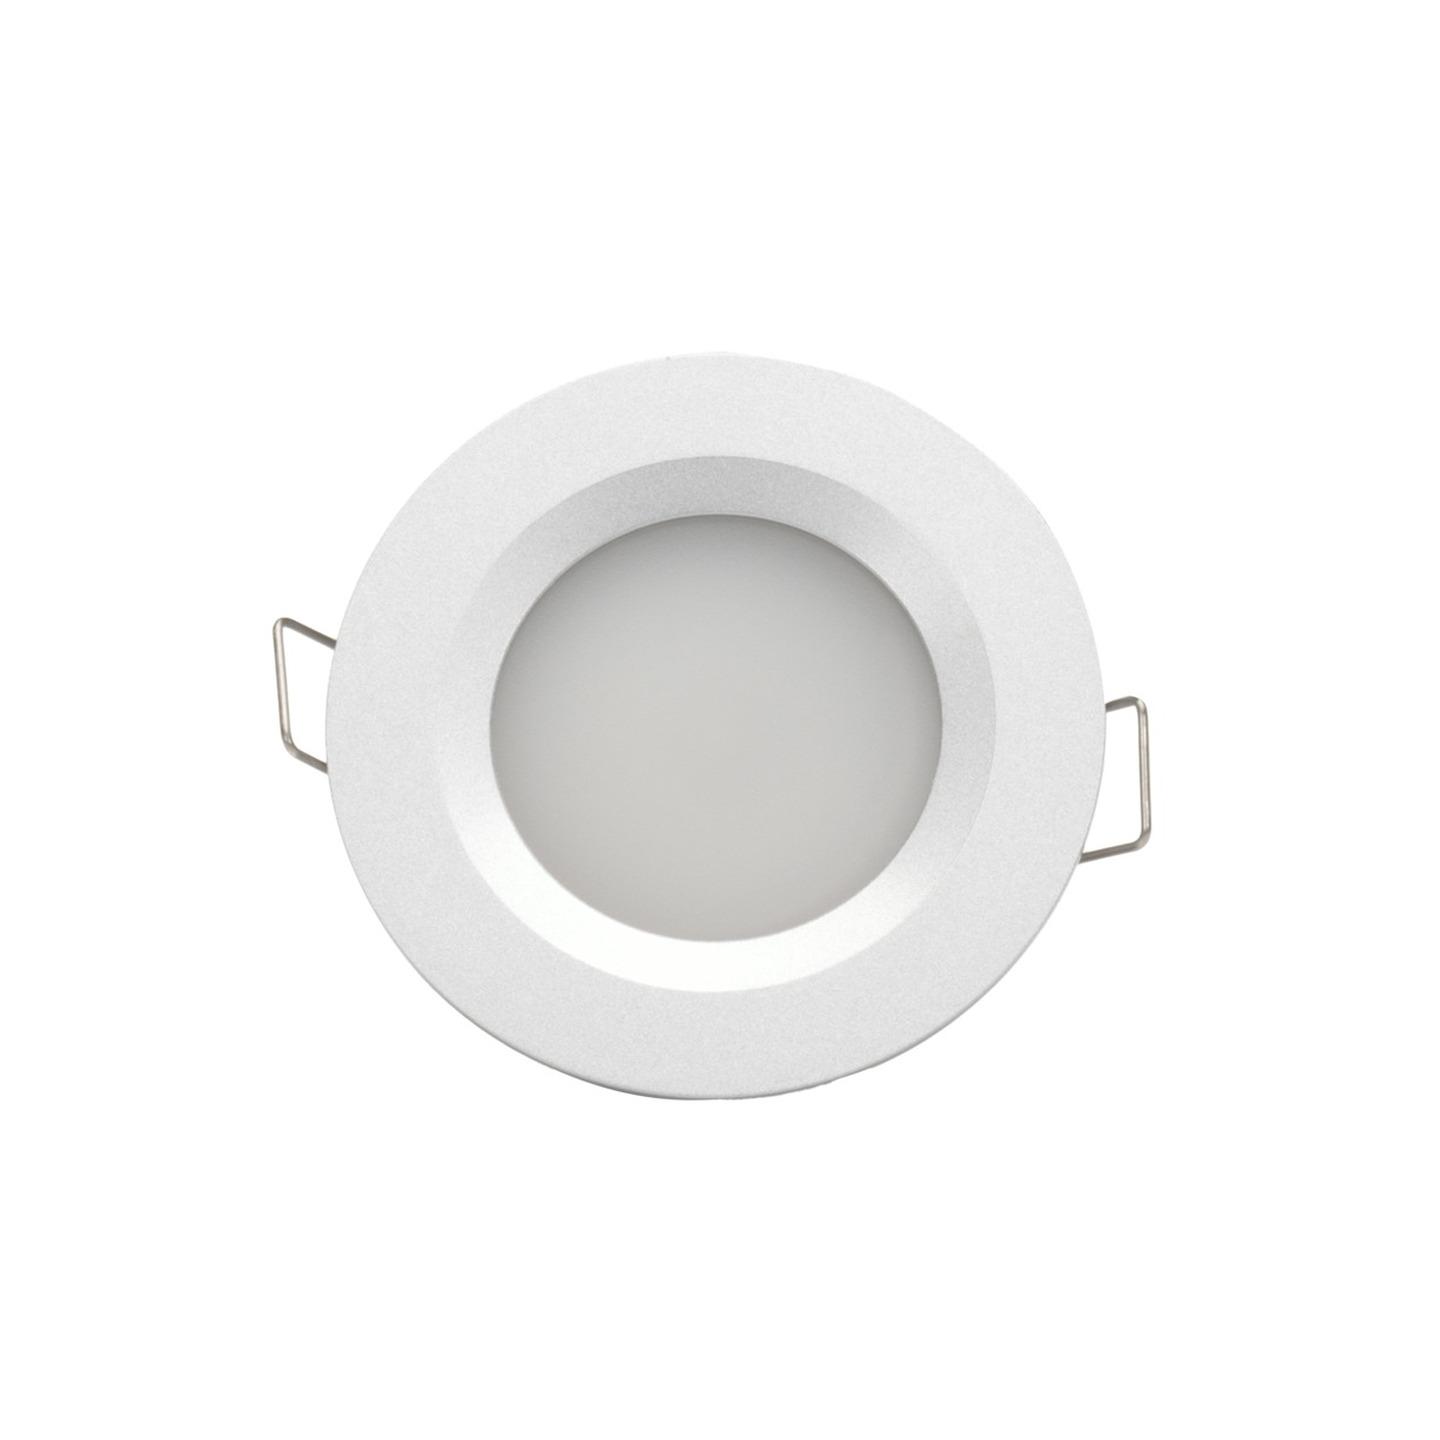 2W 11-16VDC Cool White LED Downlight with Push Button Diffuser Silver